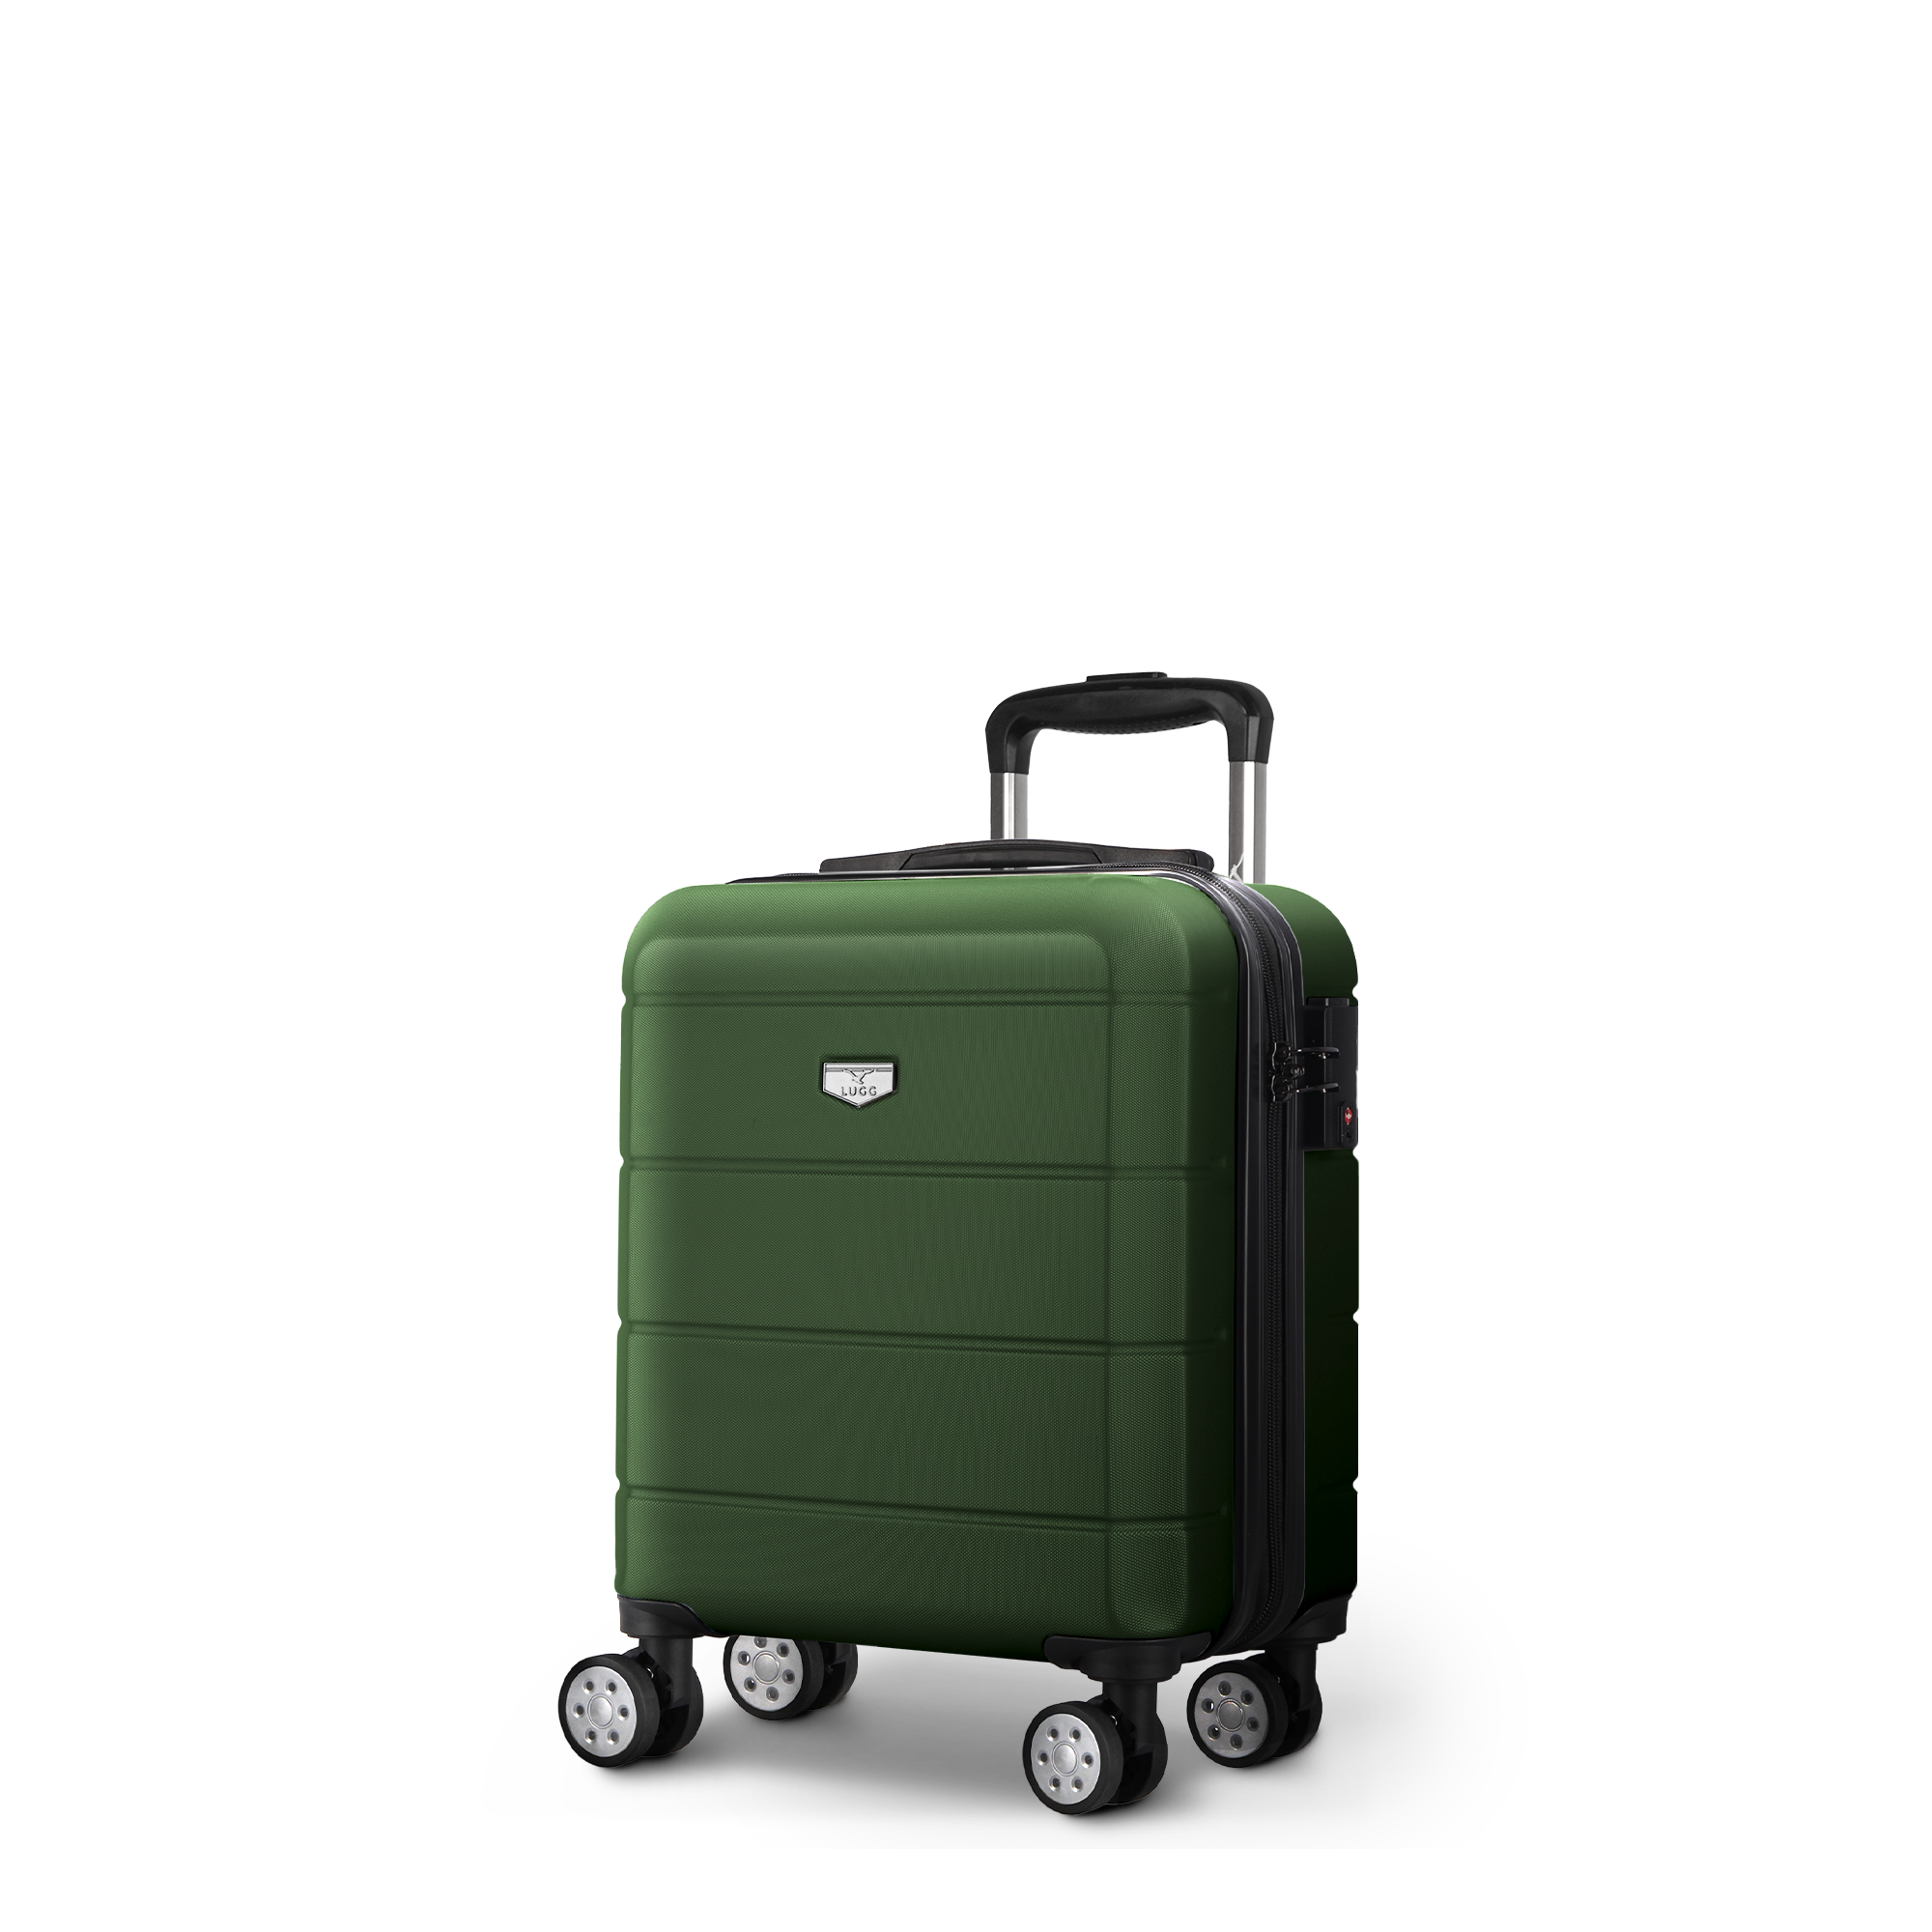 Jetset Cabin Suitcase in Army Green